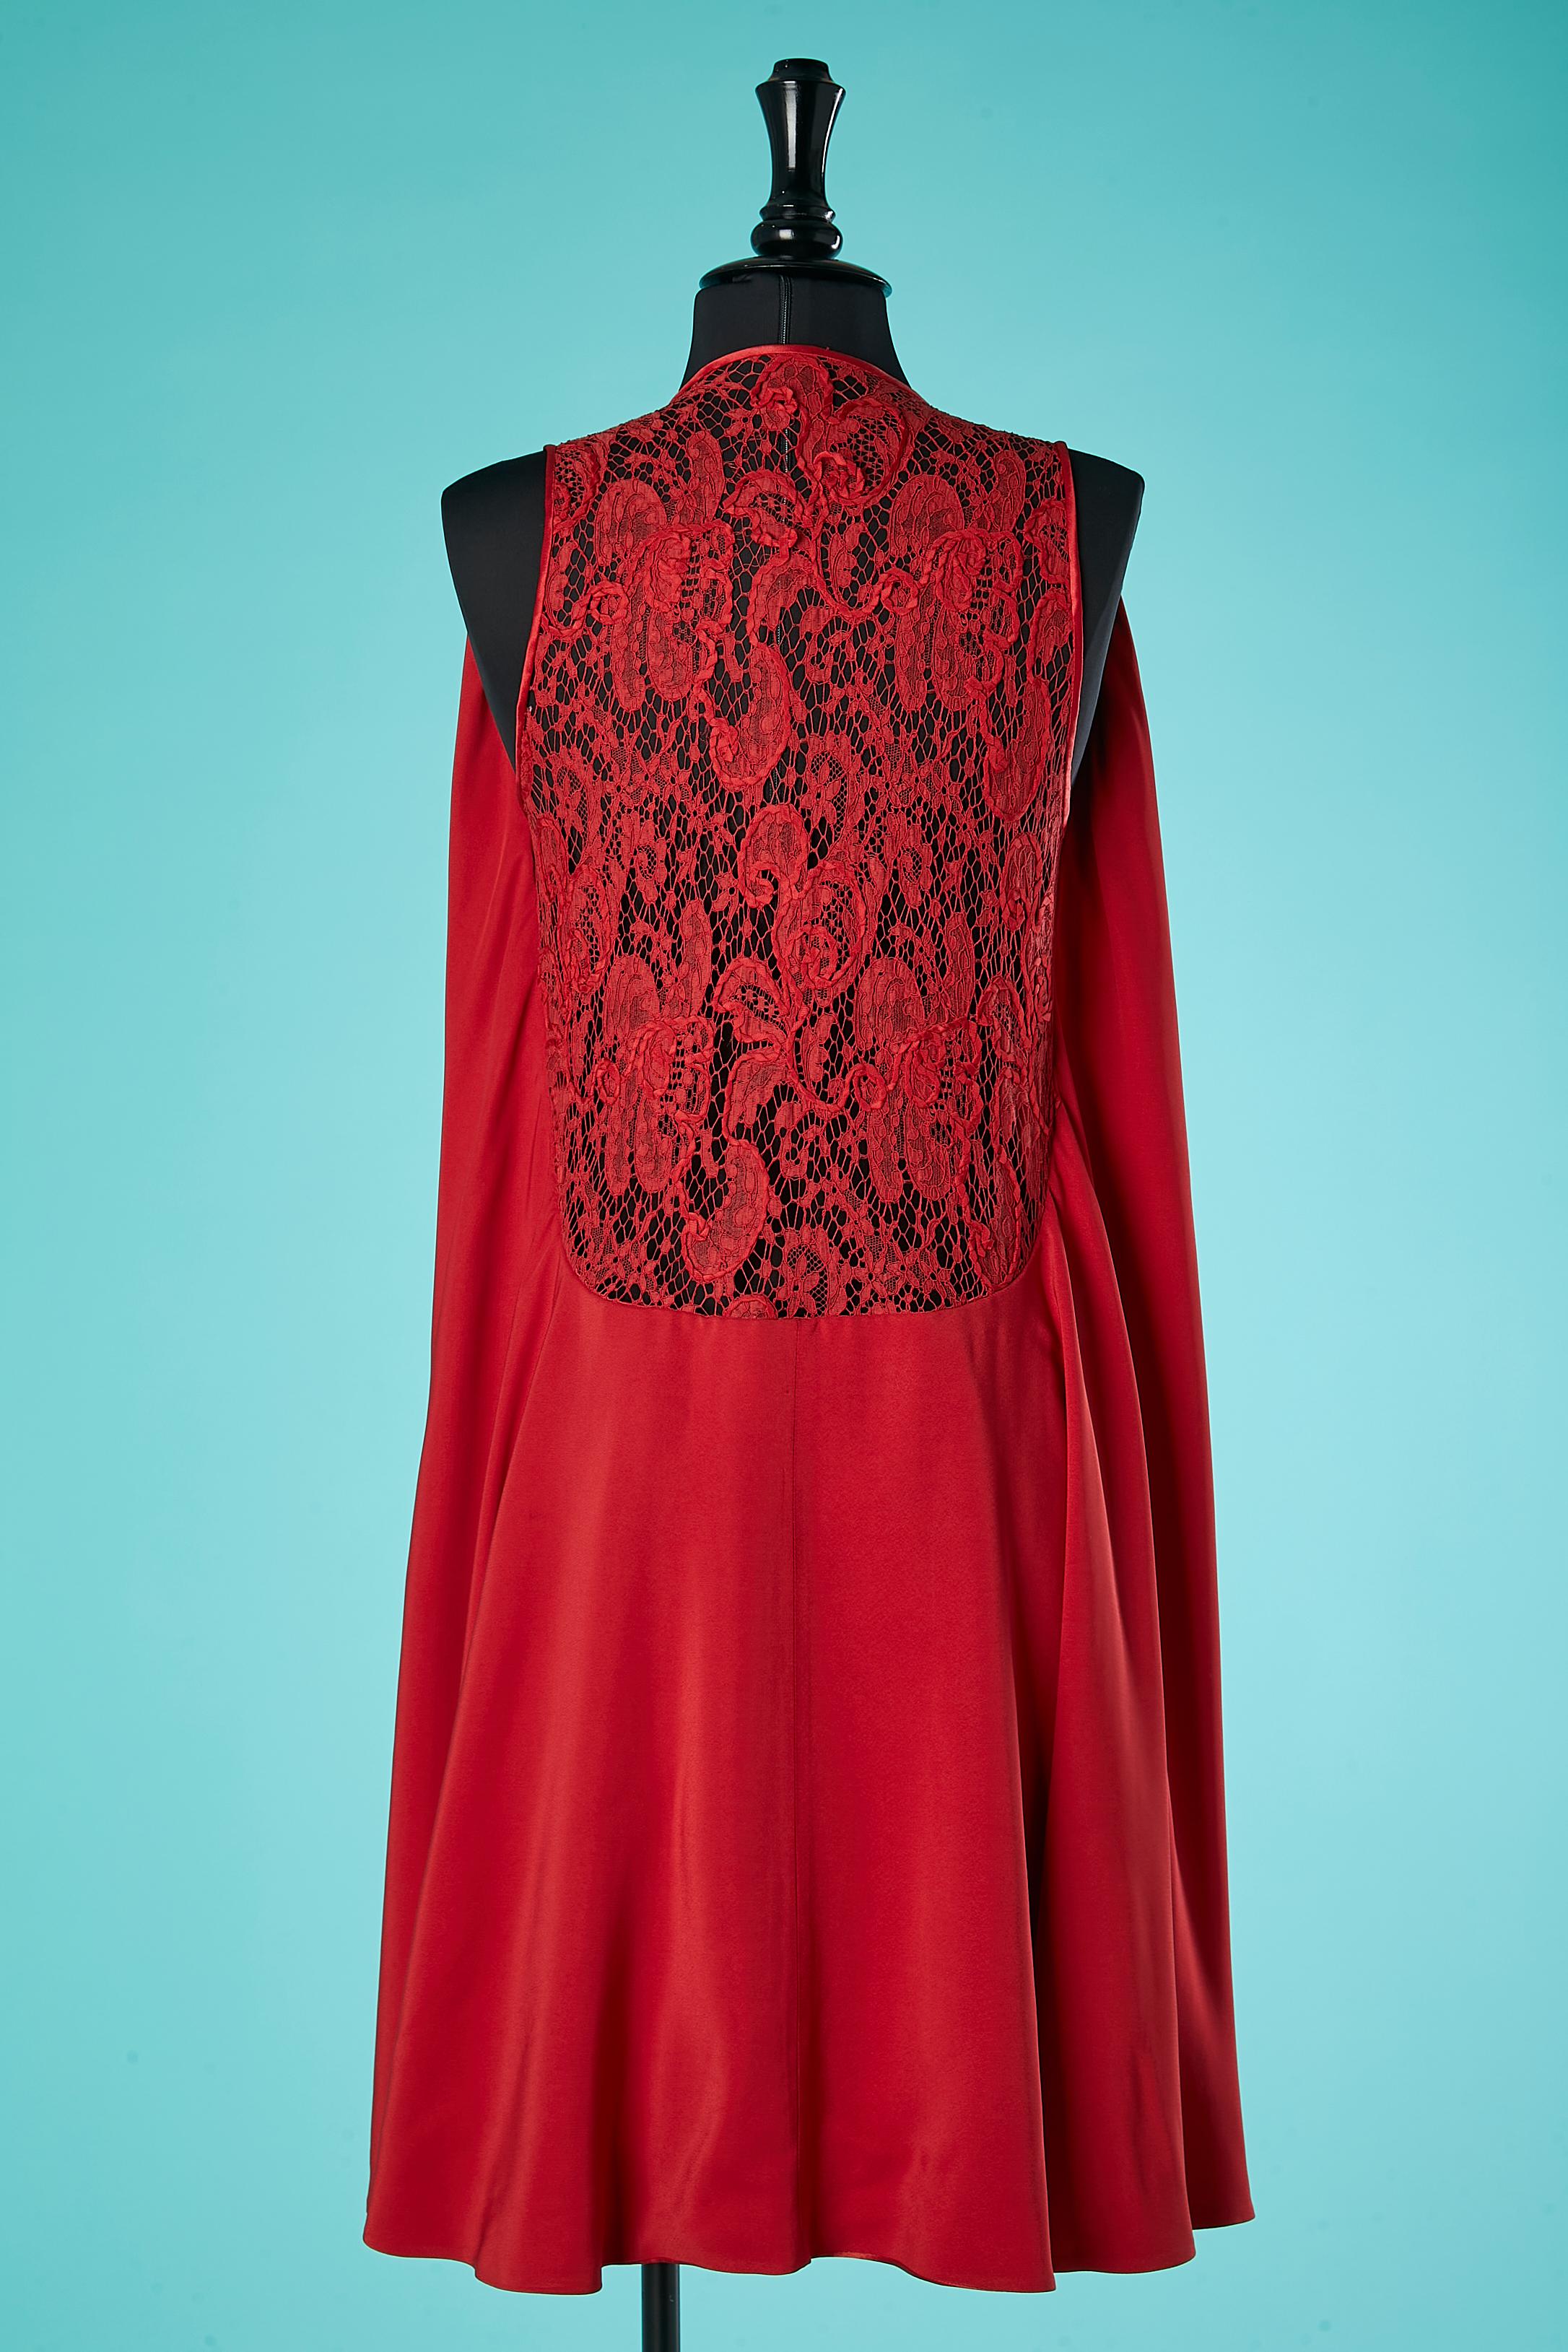 Red satin sleeveless cocktail dress with see-through lace back Grès  For Sale 1